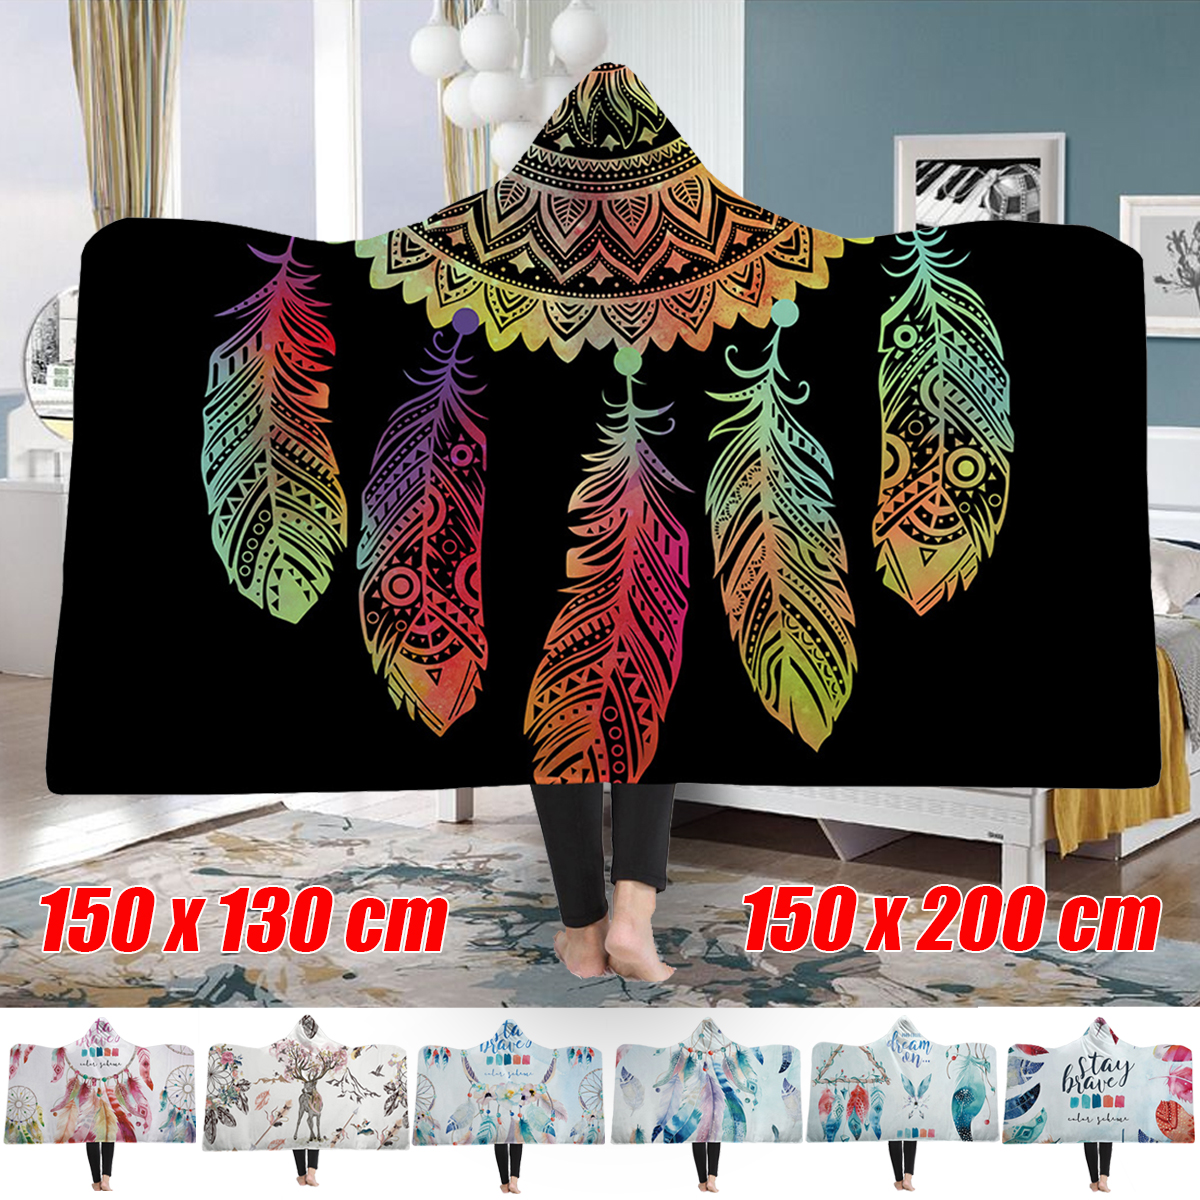 150x200cm-Bejirog-Hooded-Blanket-Adults-Child-Warm-Blankets-Wearable-Plush-Wrap-Mat-Thick-Nap-Soft-1636607-2